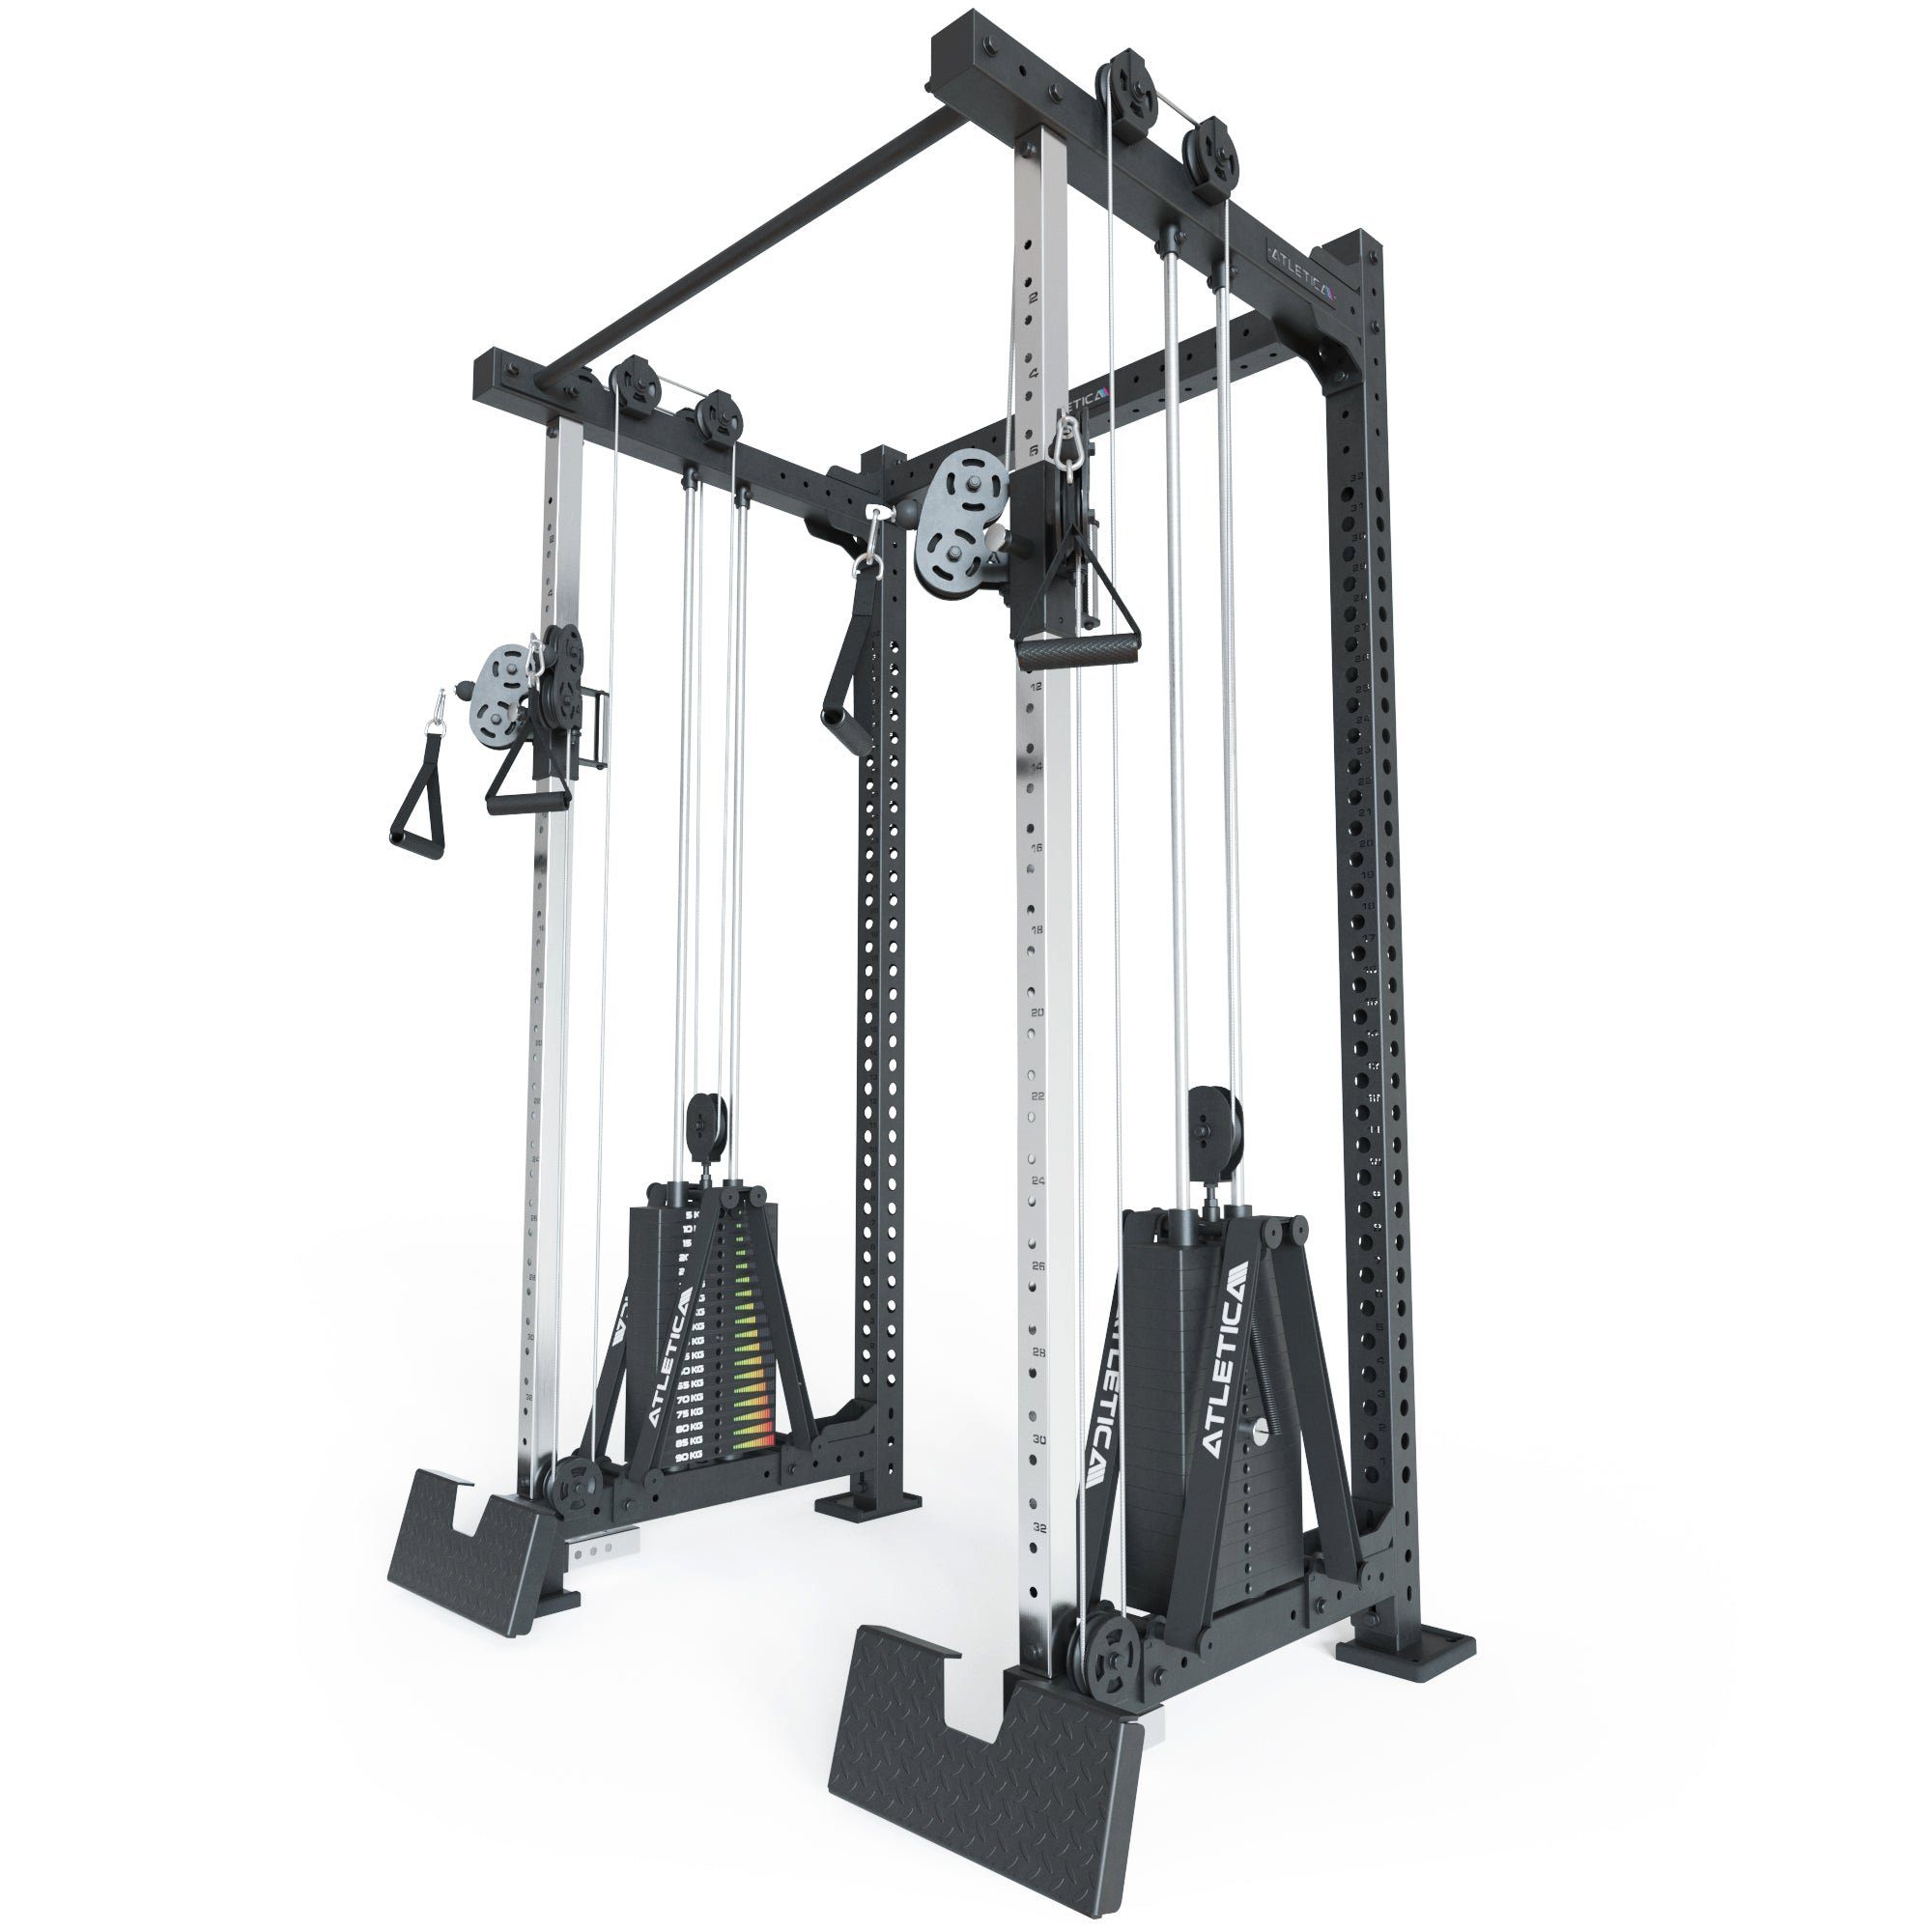 ATLETICA Power Rack R8-Nitro Cable Rack, Stand-alone Mit Double Stack, 2x90 kg